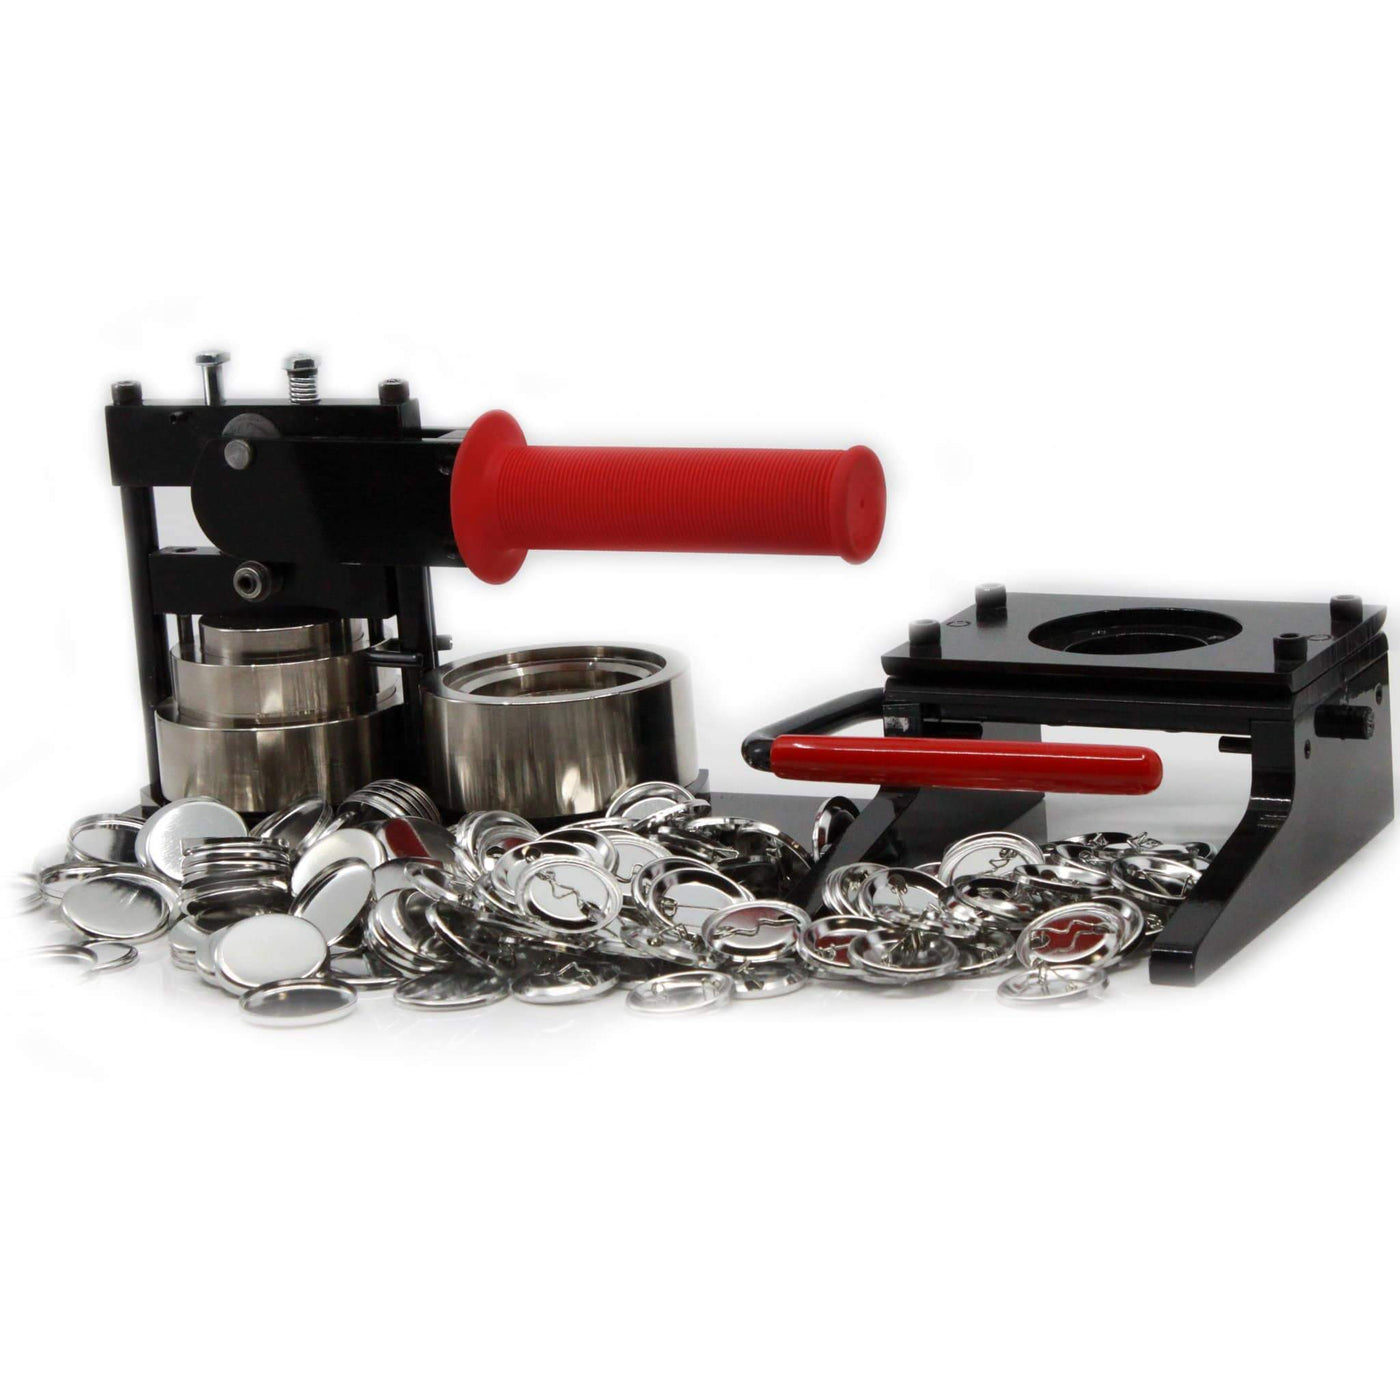 Model 175 RX, 1.75" Button Making Starter Kit with button maker, cutter and pin back parts